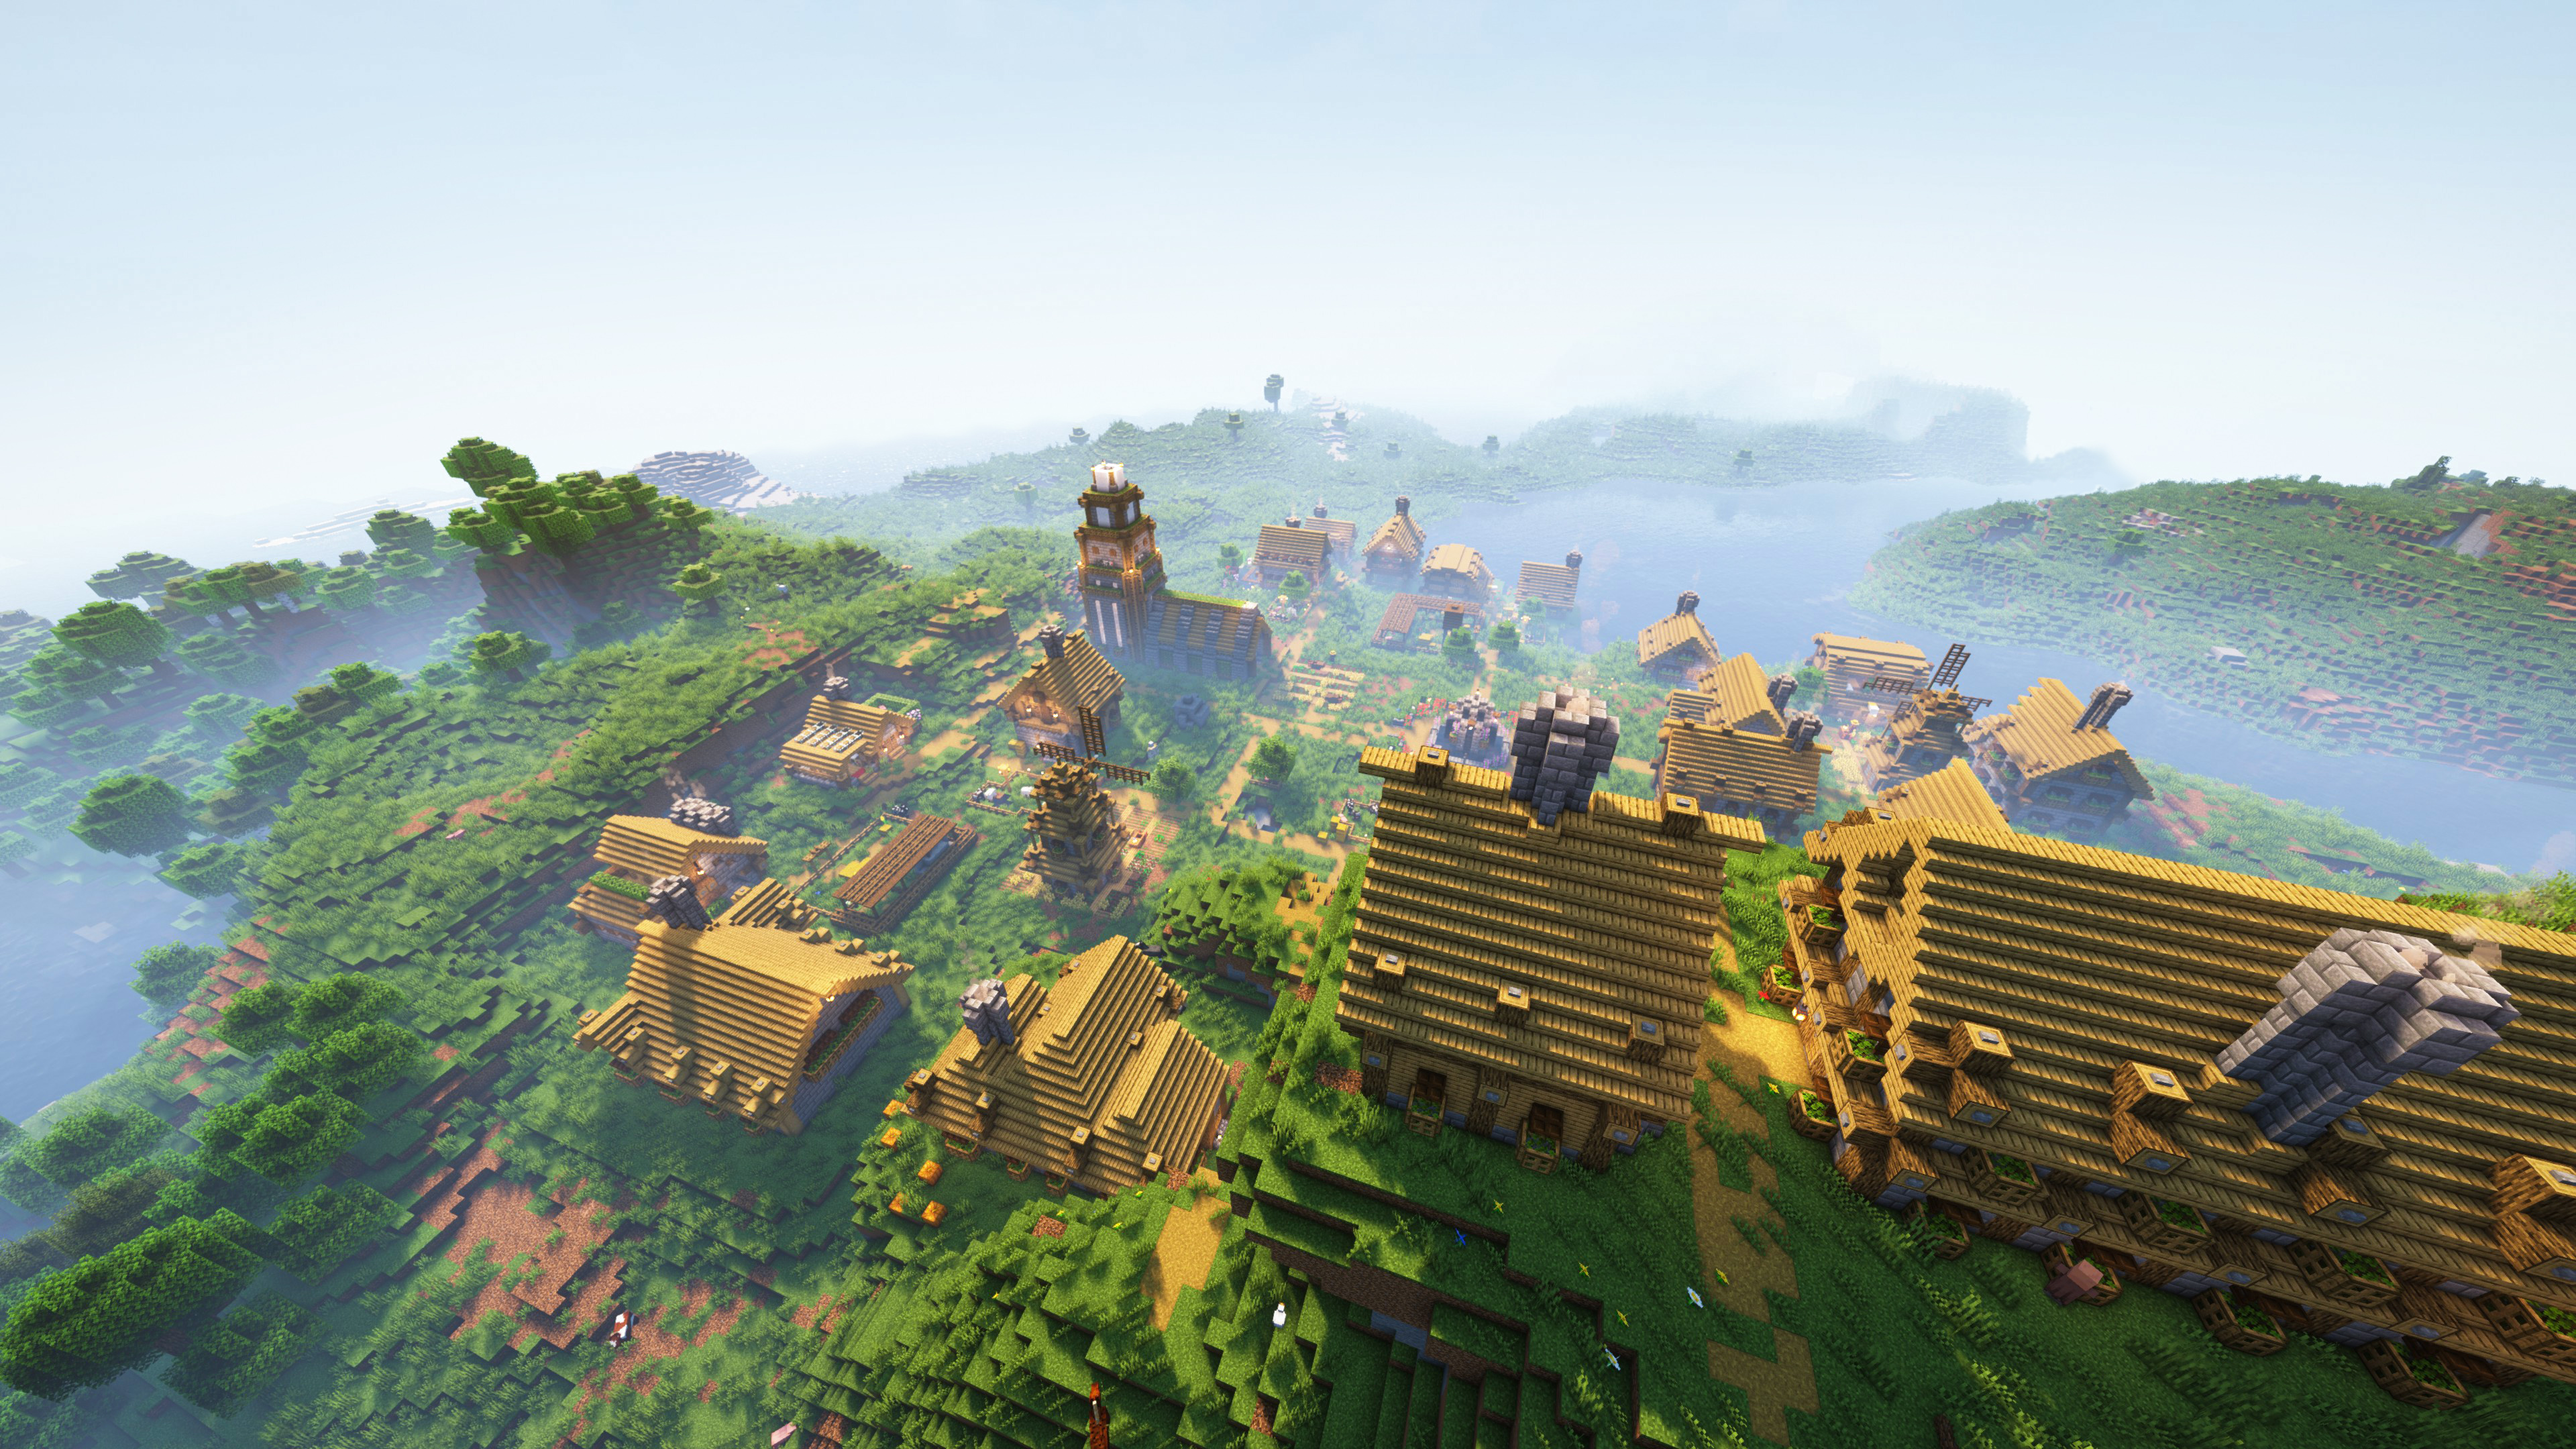 Village Minecraft Overlook Farm Video Games Cube Landscape Trees Mist Water Forest House Building CG 3840x2160